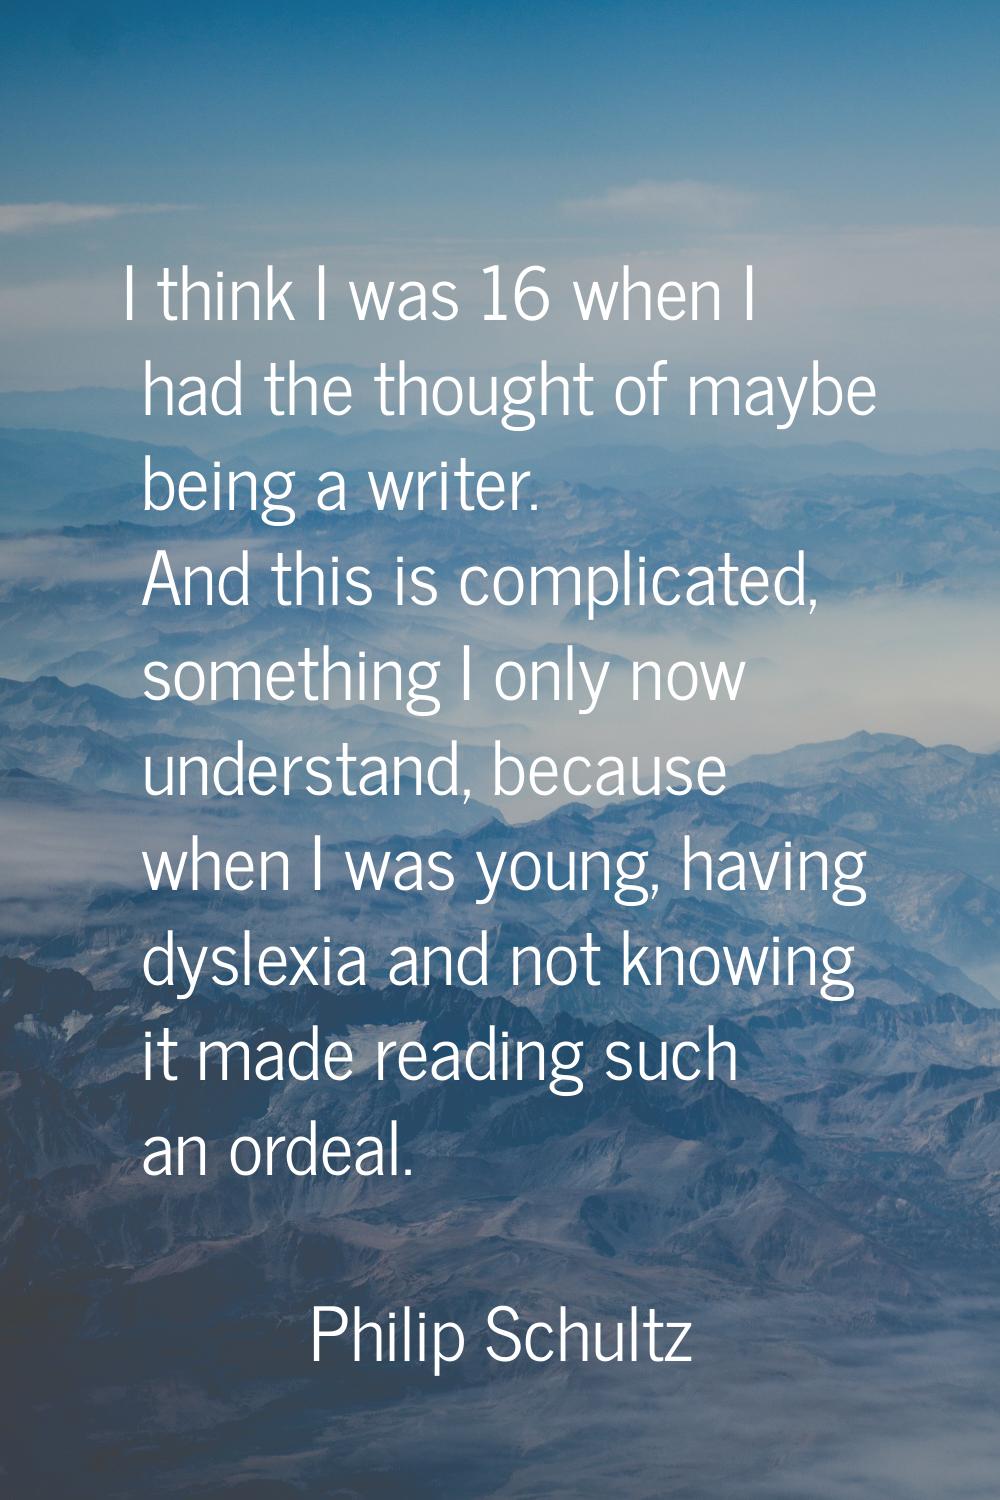 I think I was 16 when I had the thought of maybe being a writer. And this is complicated, something